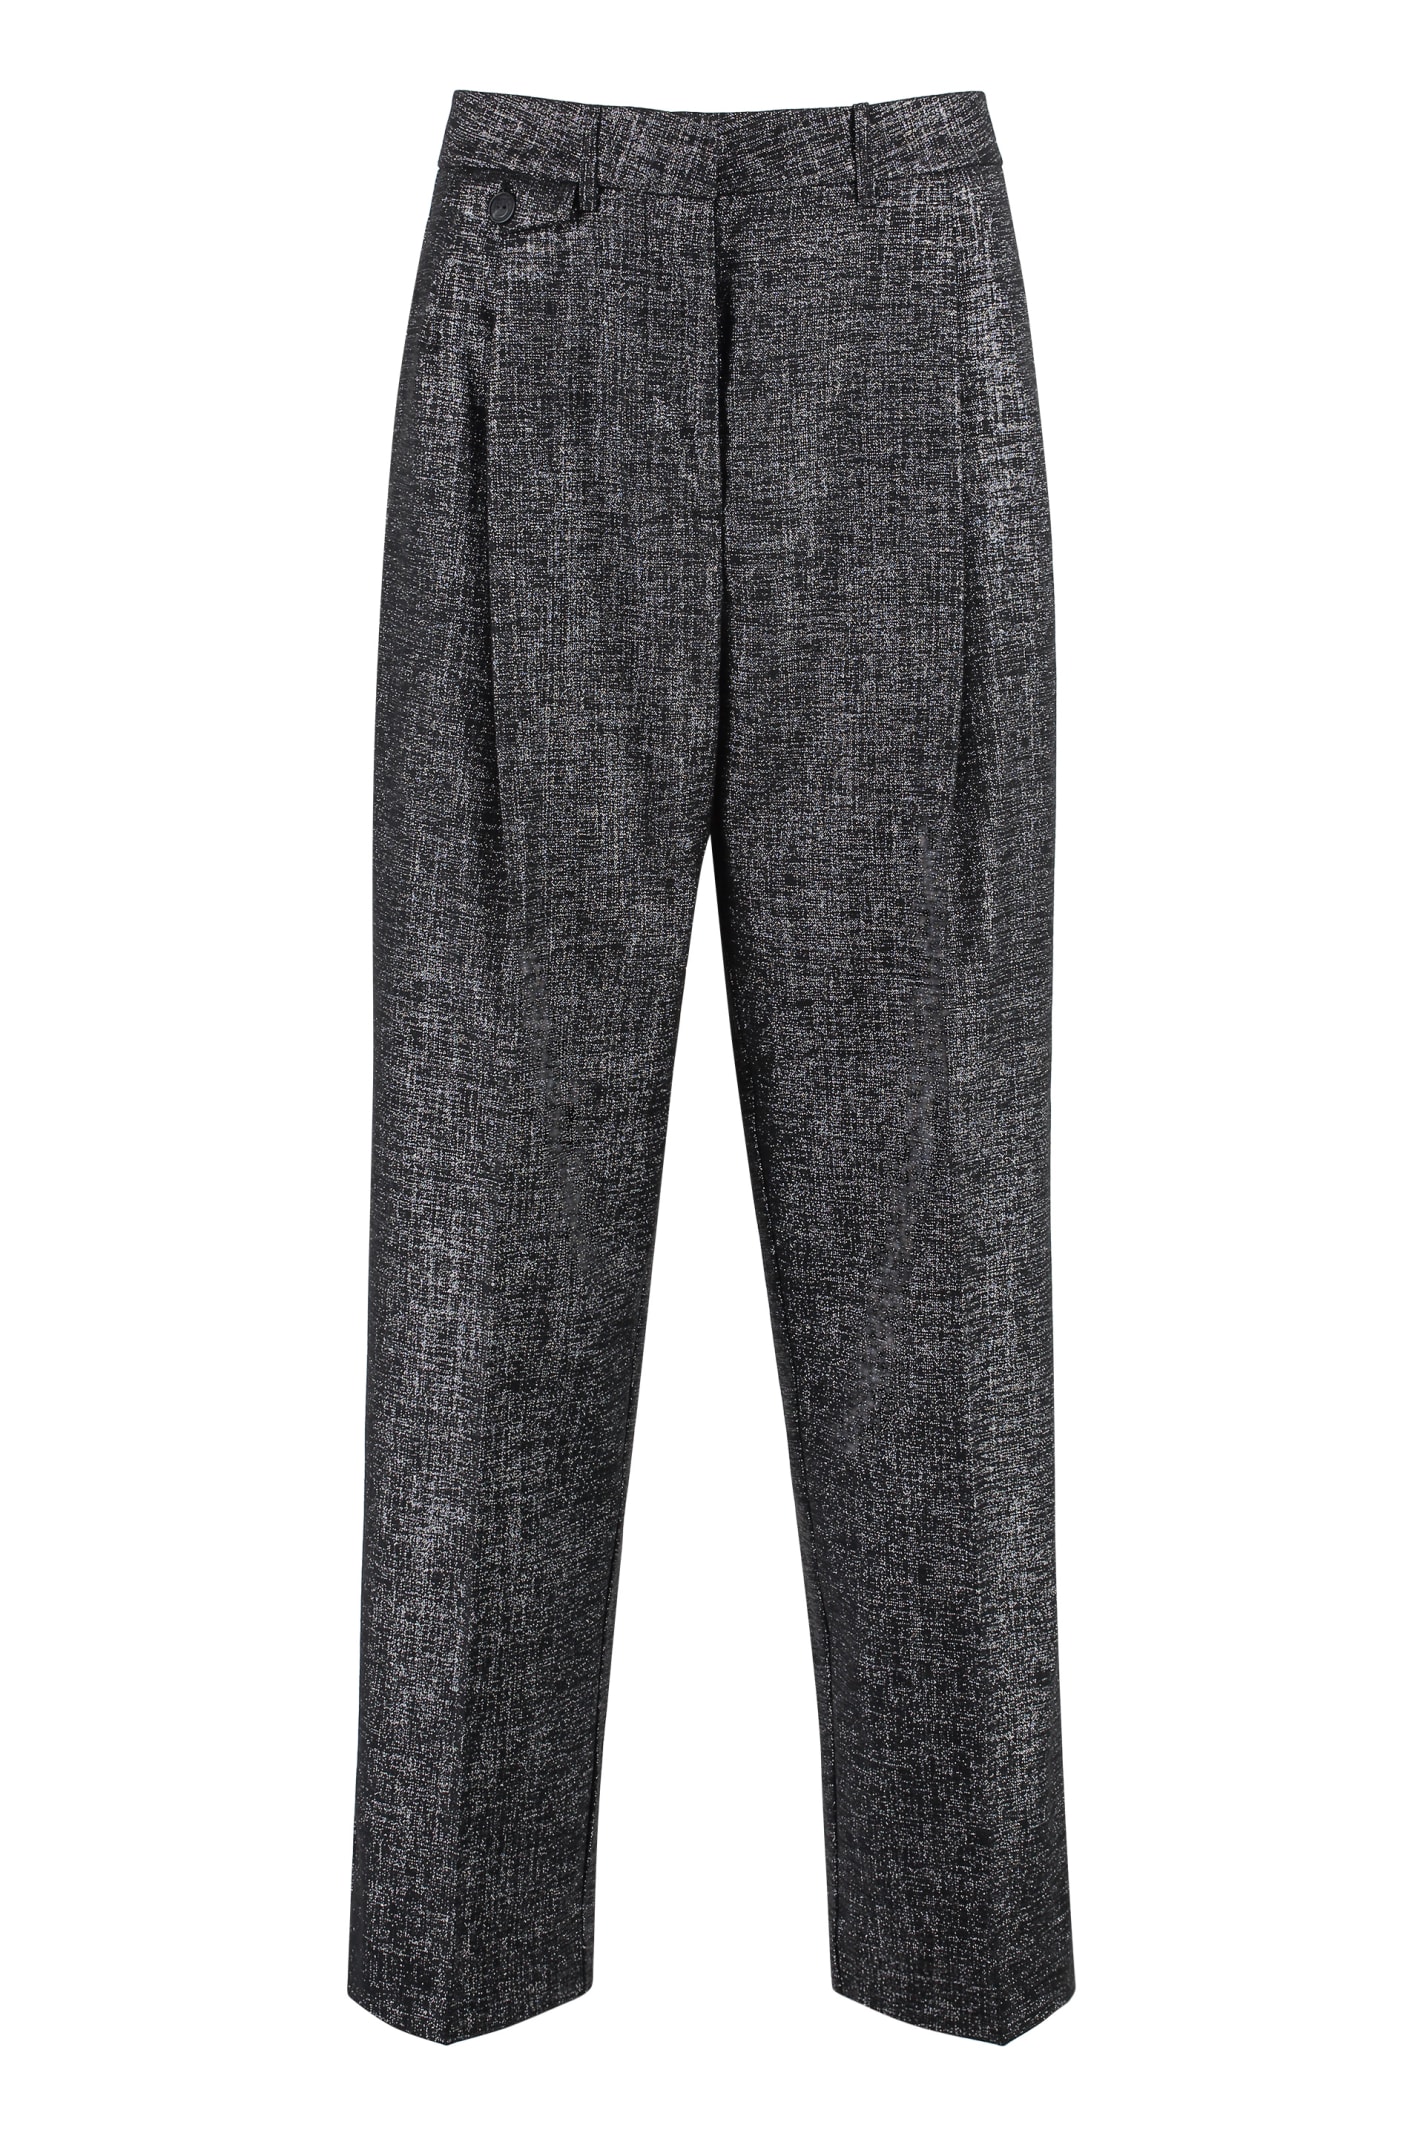 PINKO WOOL AND COTTON TROUSERS